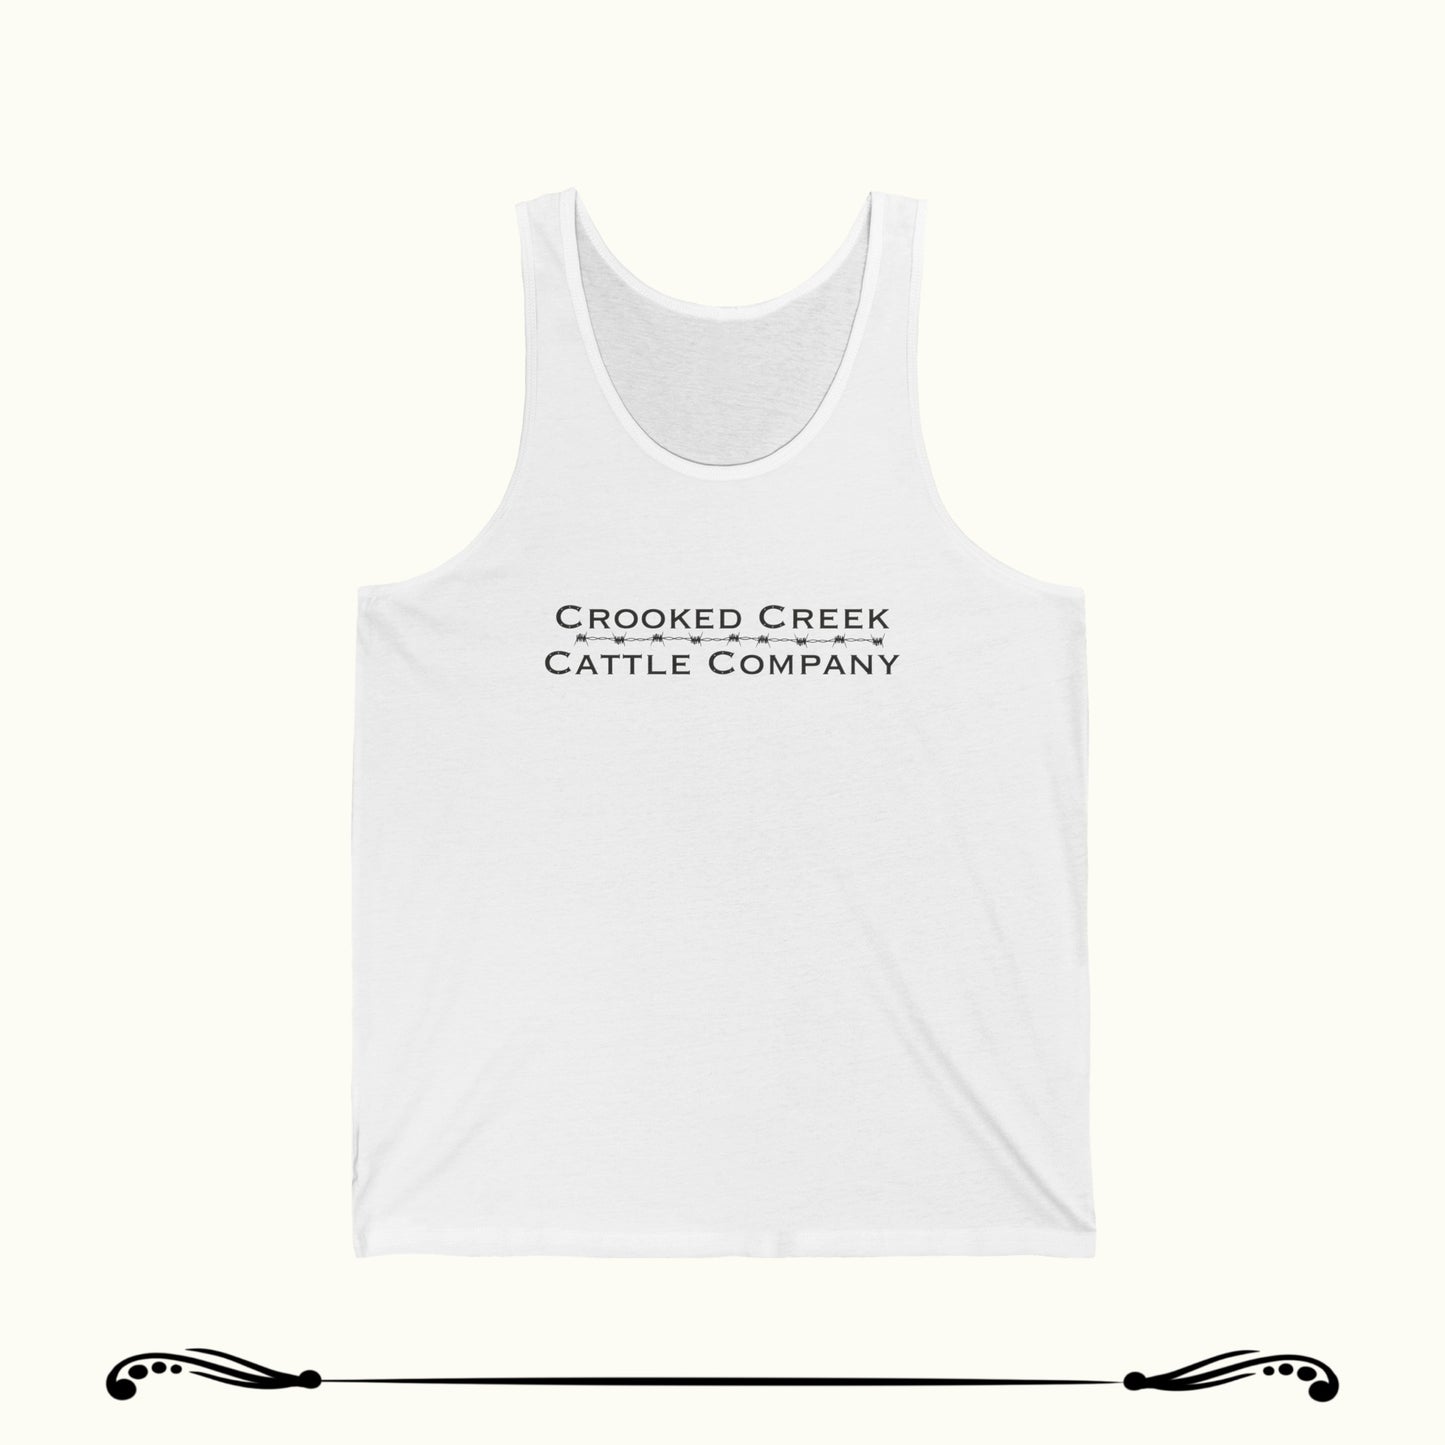 Crooked Creek Cattle Company Tank Top